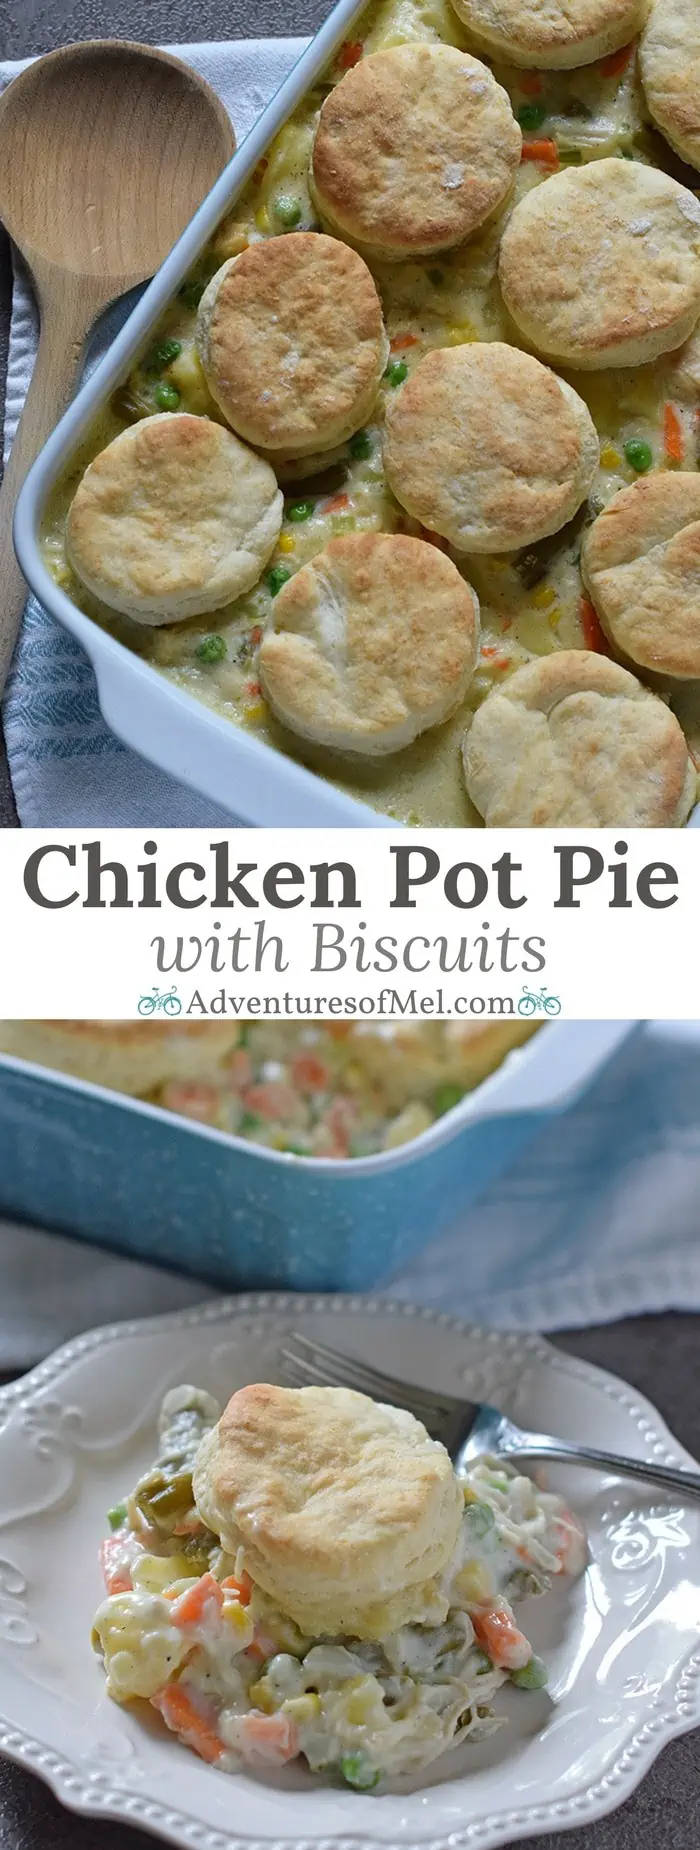 One of my favorite dinner recipes! Chicken Pot Pie with Grandma's biscuits, filled with a medley of vegetables in a mouthwatering creamy sauce, seasoned with sage. Ultimate comfort food dinner recipe.